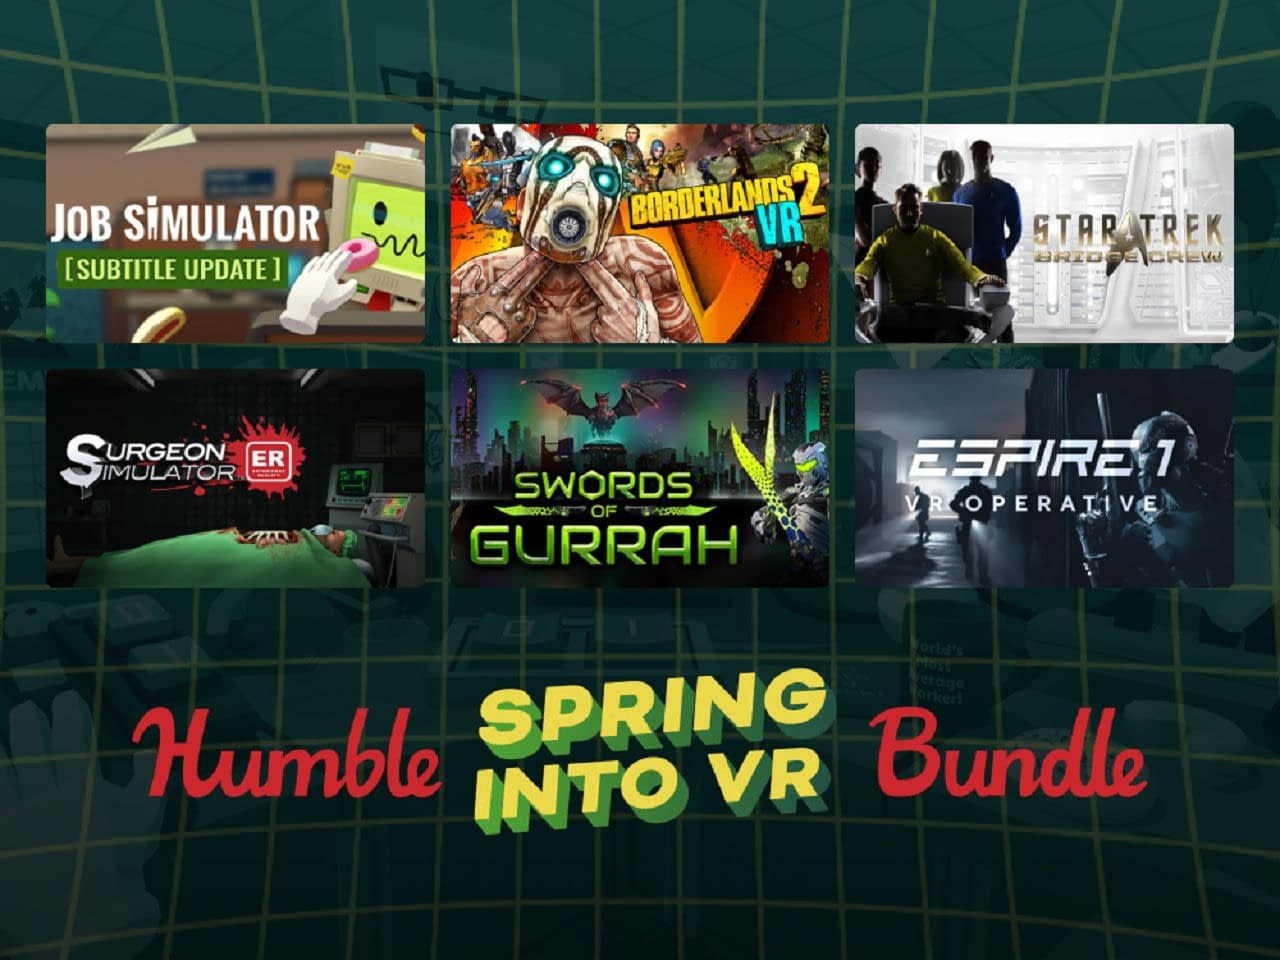 The Humble Bundle Spring Vr Event Has Launched